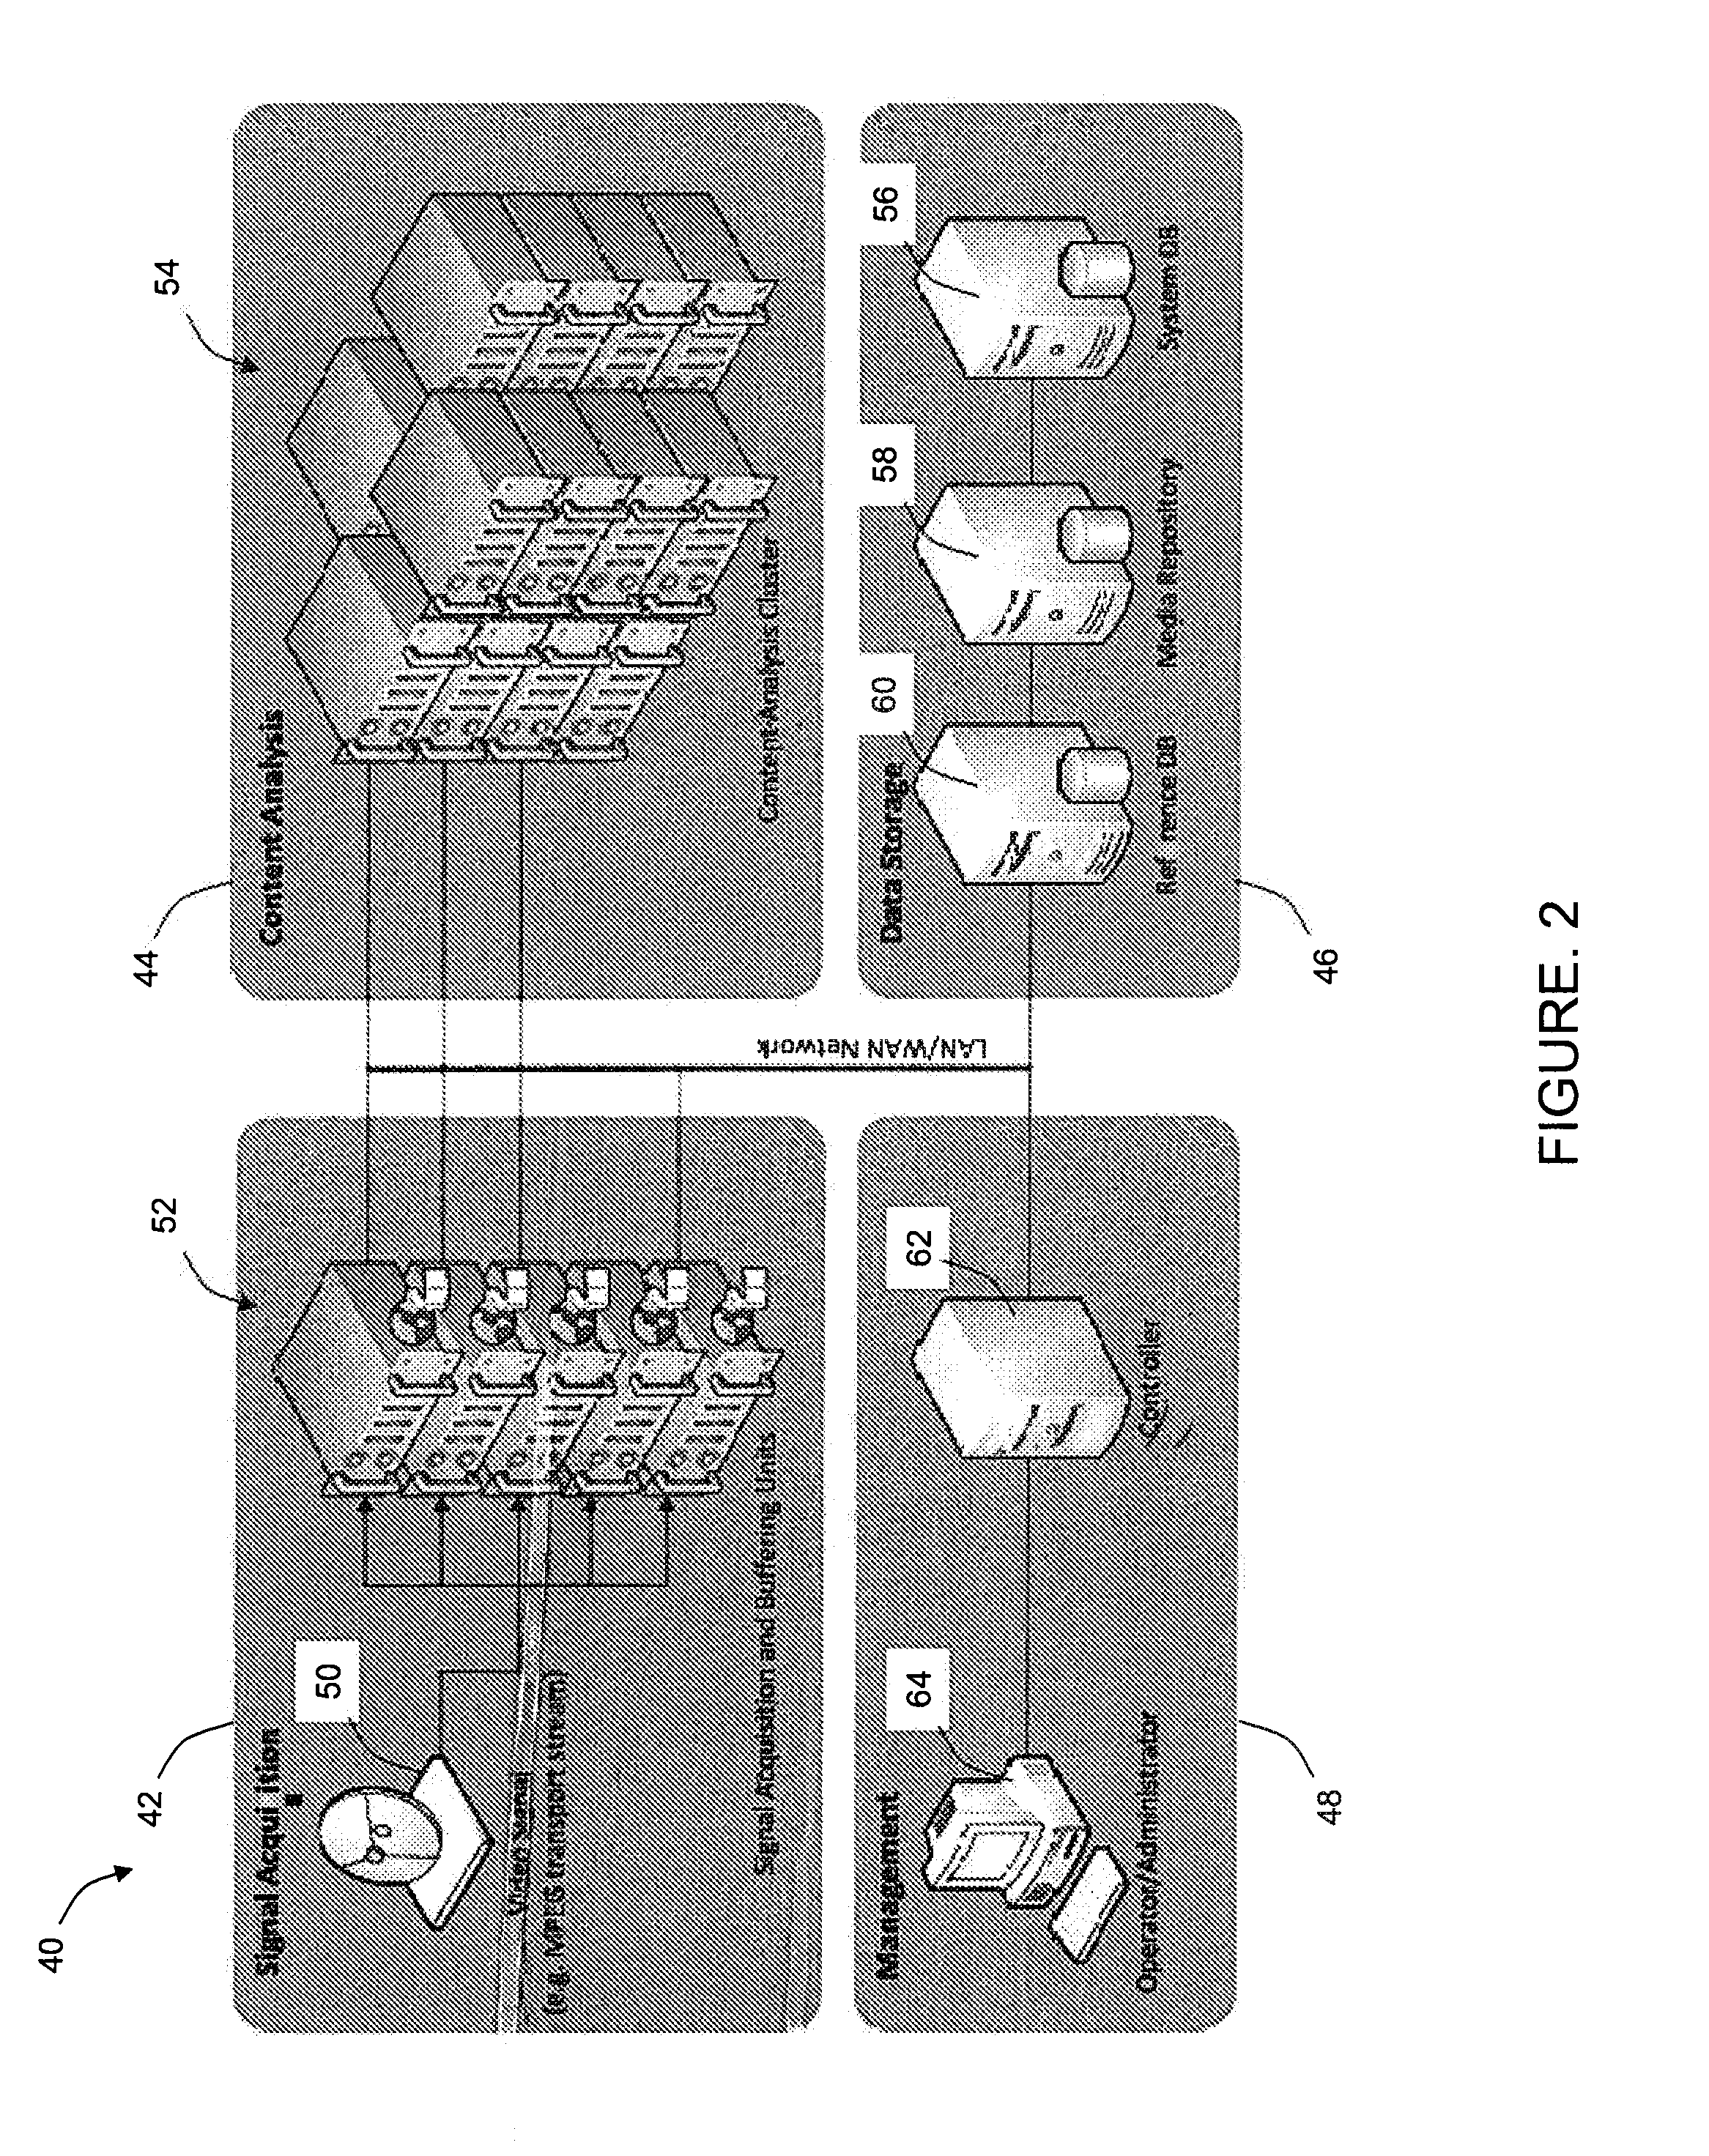 Video detection system and methods